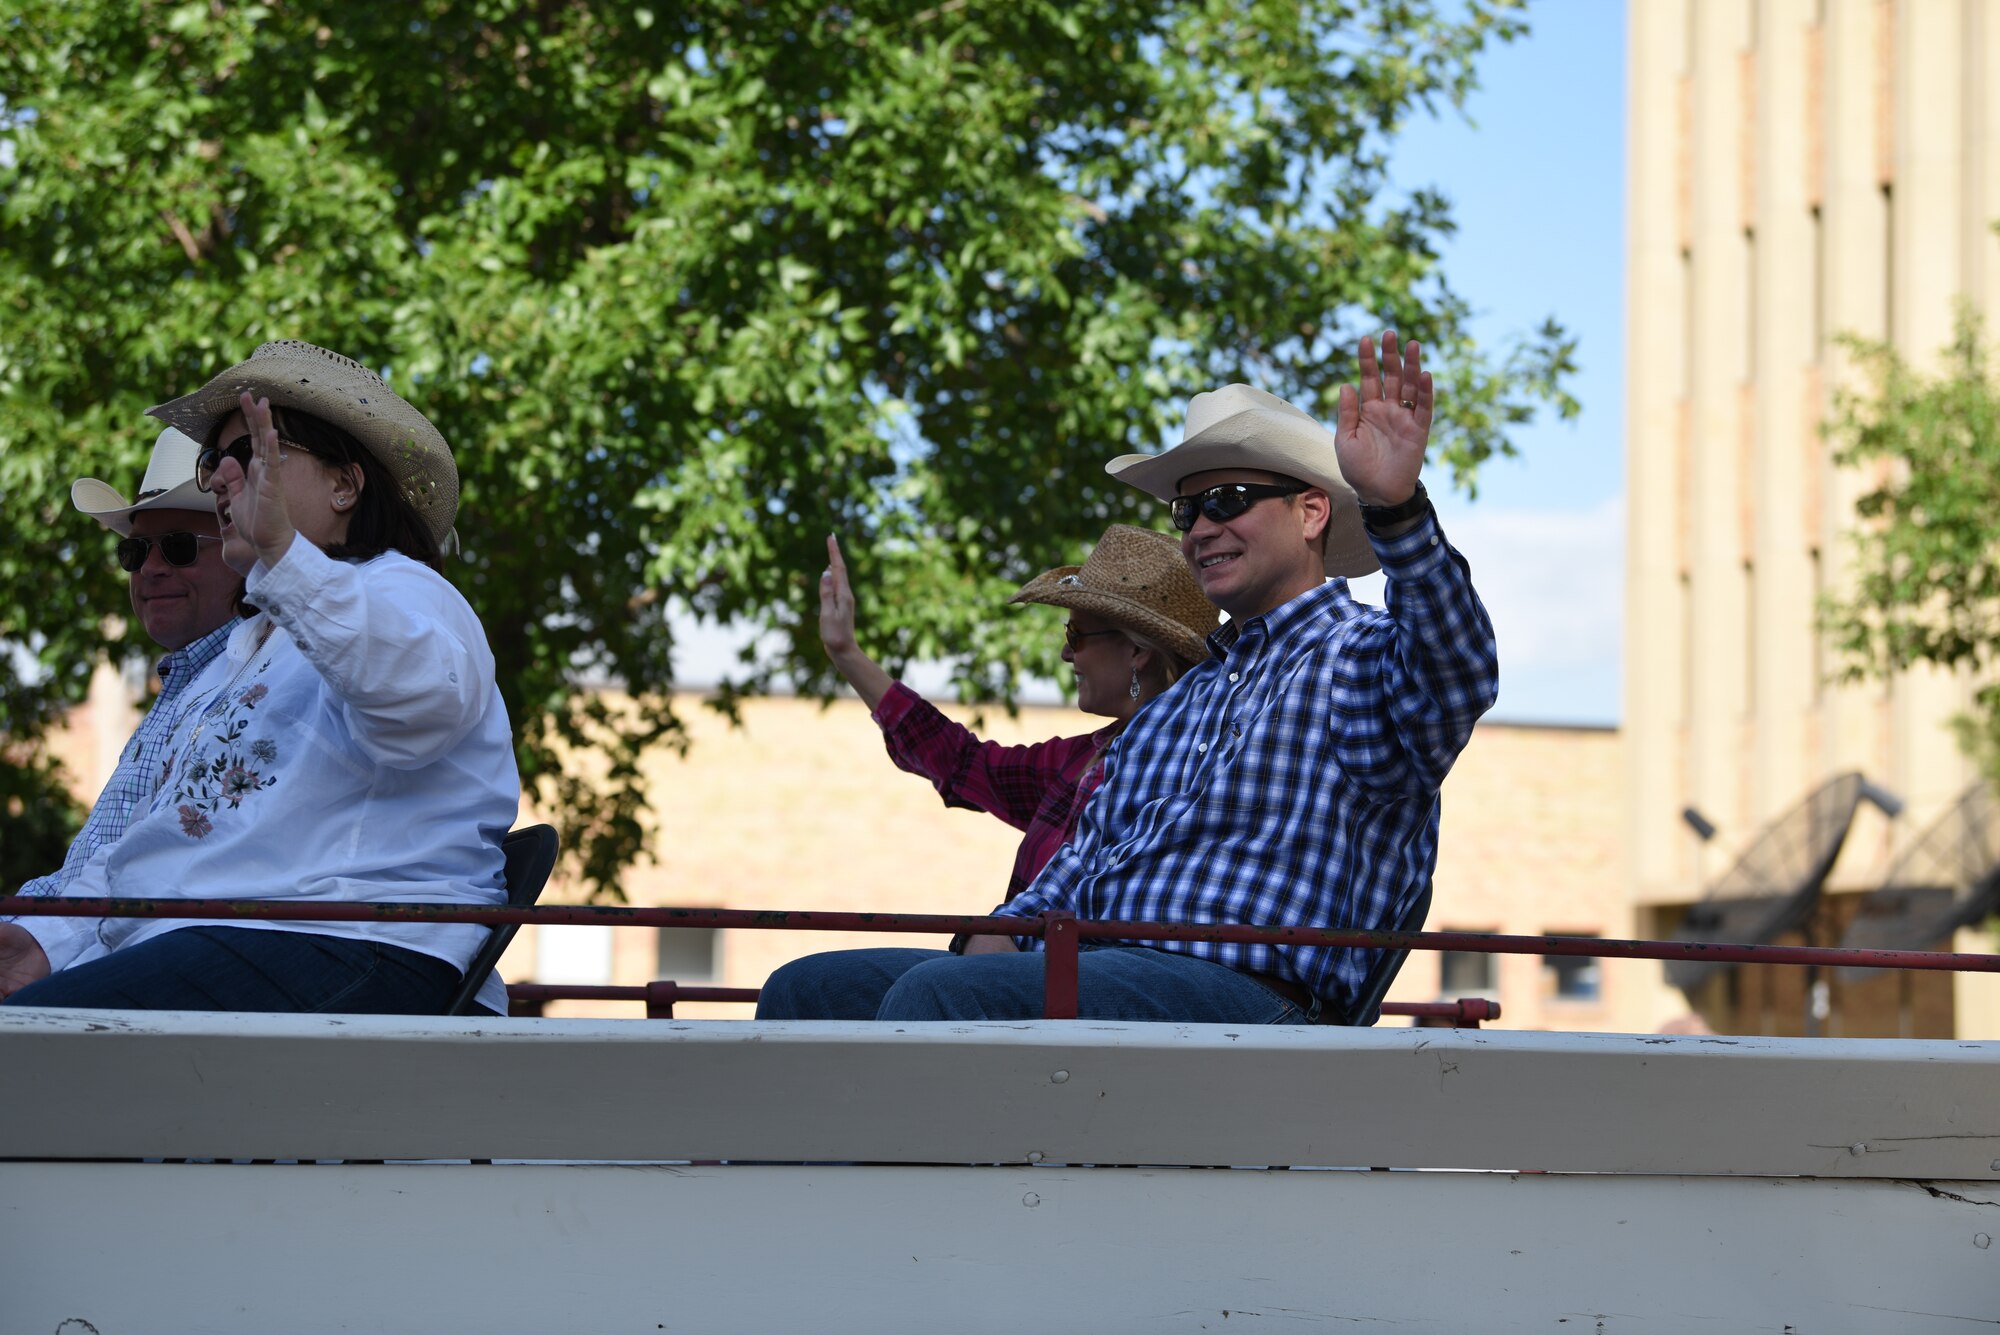 Major General Fred Stoss, 20th Air Force commander, and Col. Peter Bonetti, 90th Missile Wing commander, along with their famillies, wave at the crowd during the 123rd Cheyenne Frontier Days opening Grand Parade in Cheyenne, Wyo., July 20, 2019. The Cheyenne community and F.E. Warren Air Force Base have been working together for 123 years to keep the Daddy of ‘em All, running smoothly. (U.S. Air Force photo by Staff Sgt. Ashley N. Sokolov)